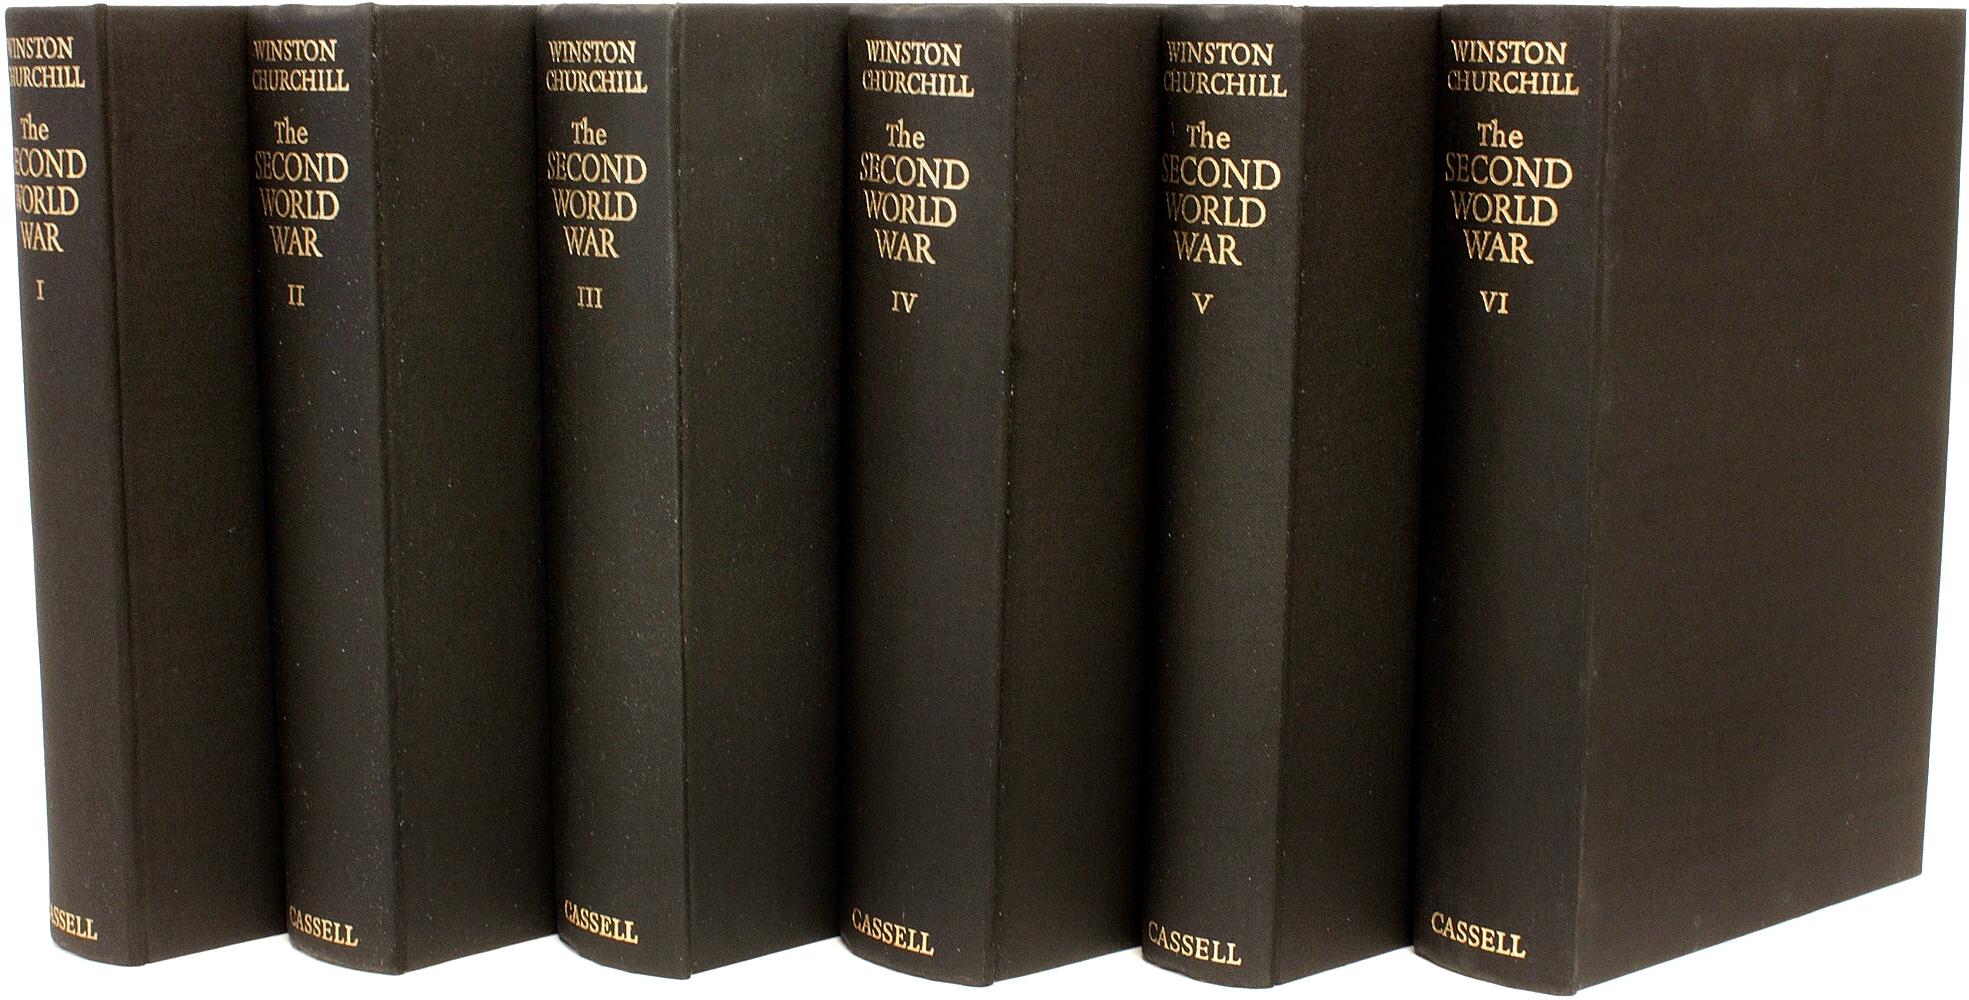 20th Century Winston CHURCHILL, The Second World War, 6 VOL, All 1st EDS with DJ's, 1948-54